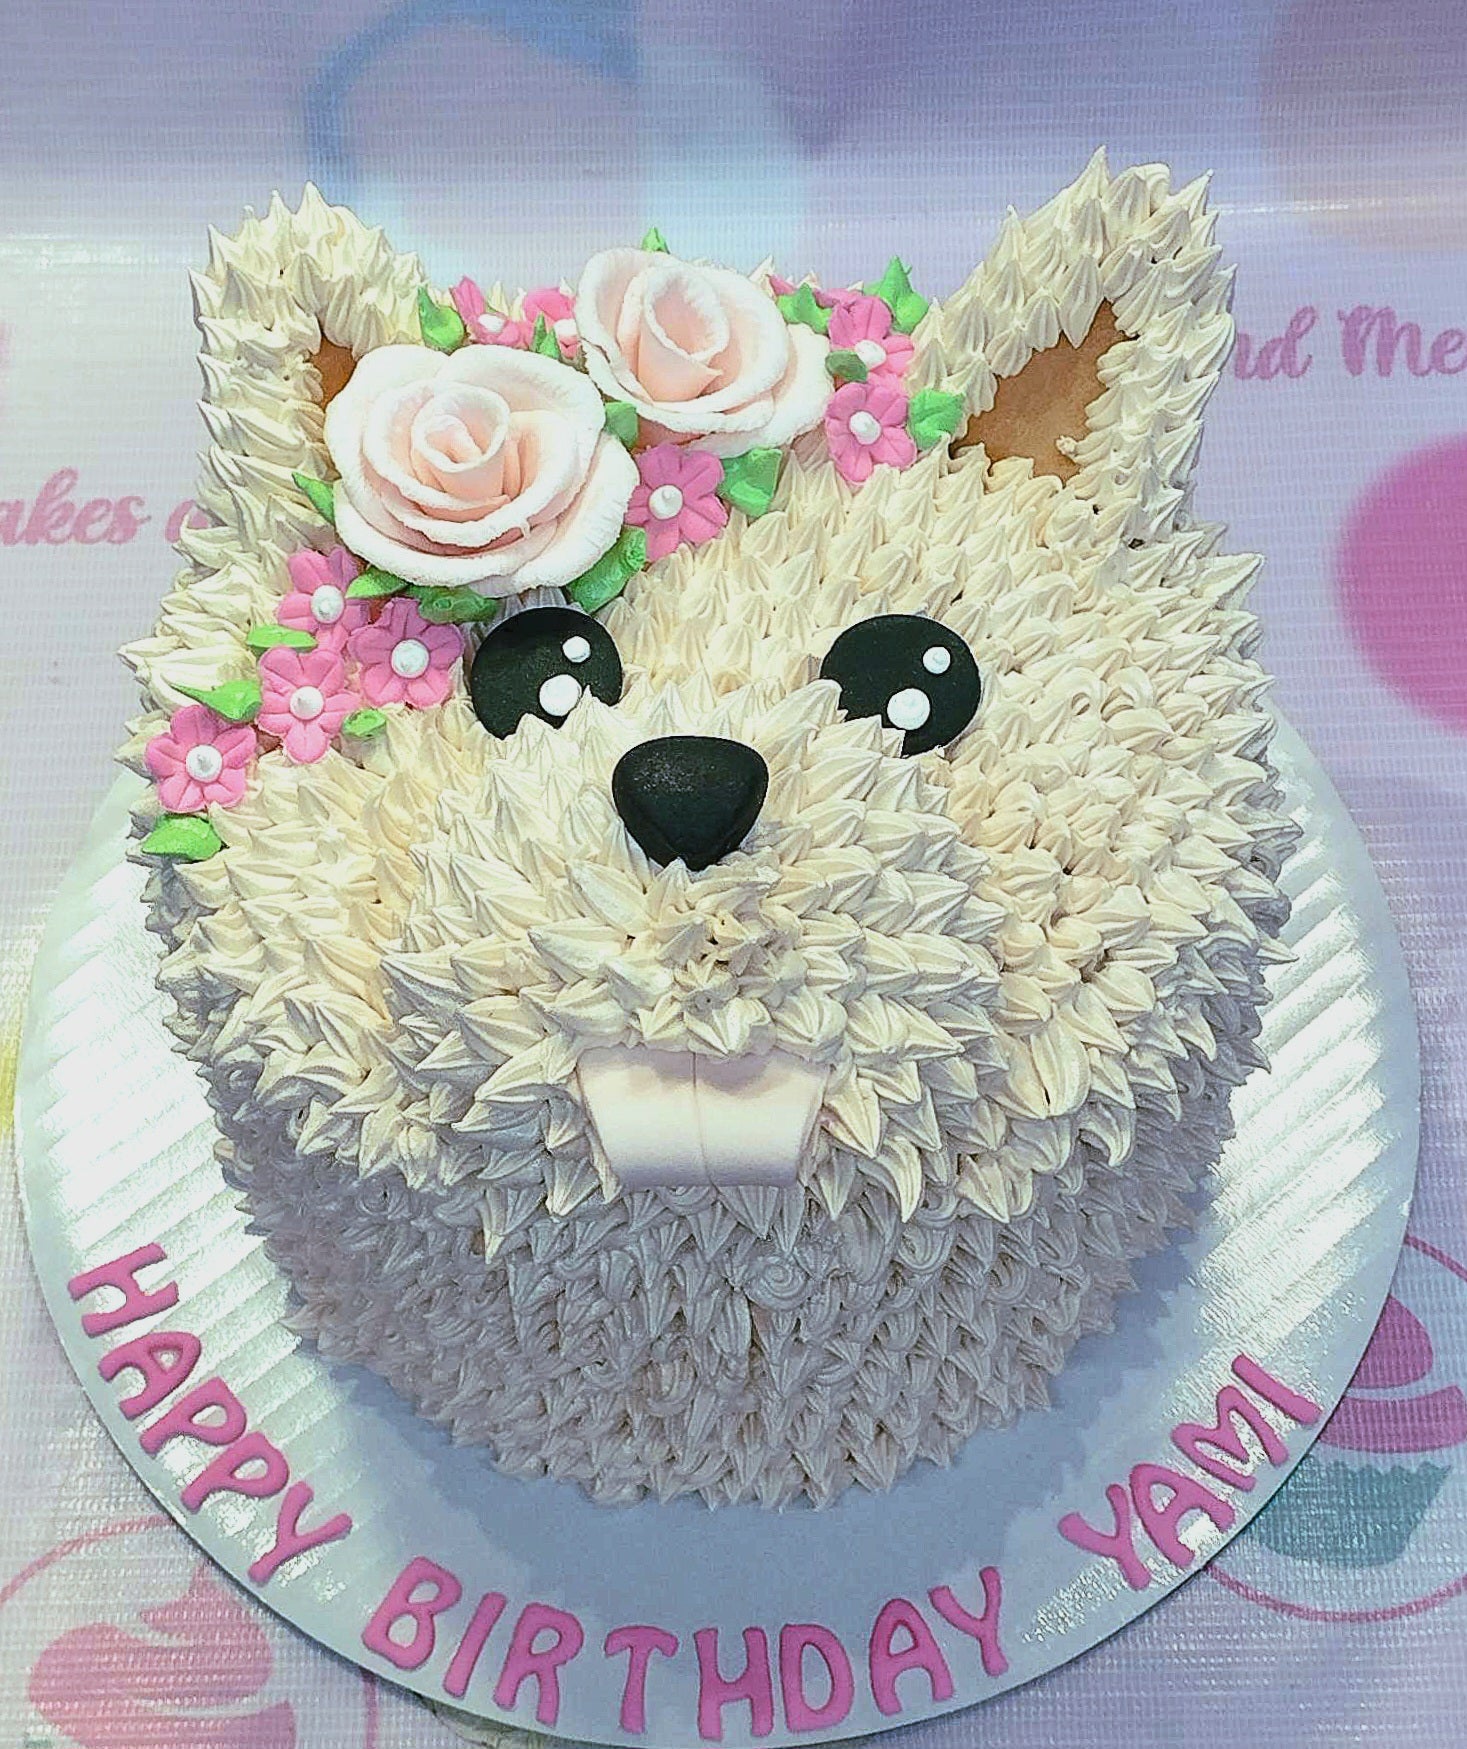 This gorgeous Dog Cake is custom-decorated with creamy brown icing and cute pups. Perfect for celebrating the birthday of your fur baby or any special occasion for pet parents. Handmade with love, this cake is sure to make your pet proud.